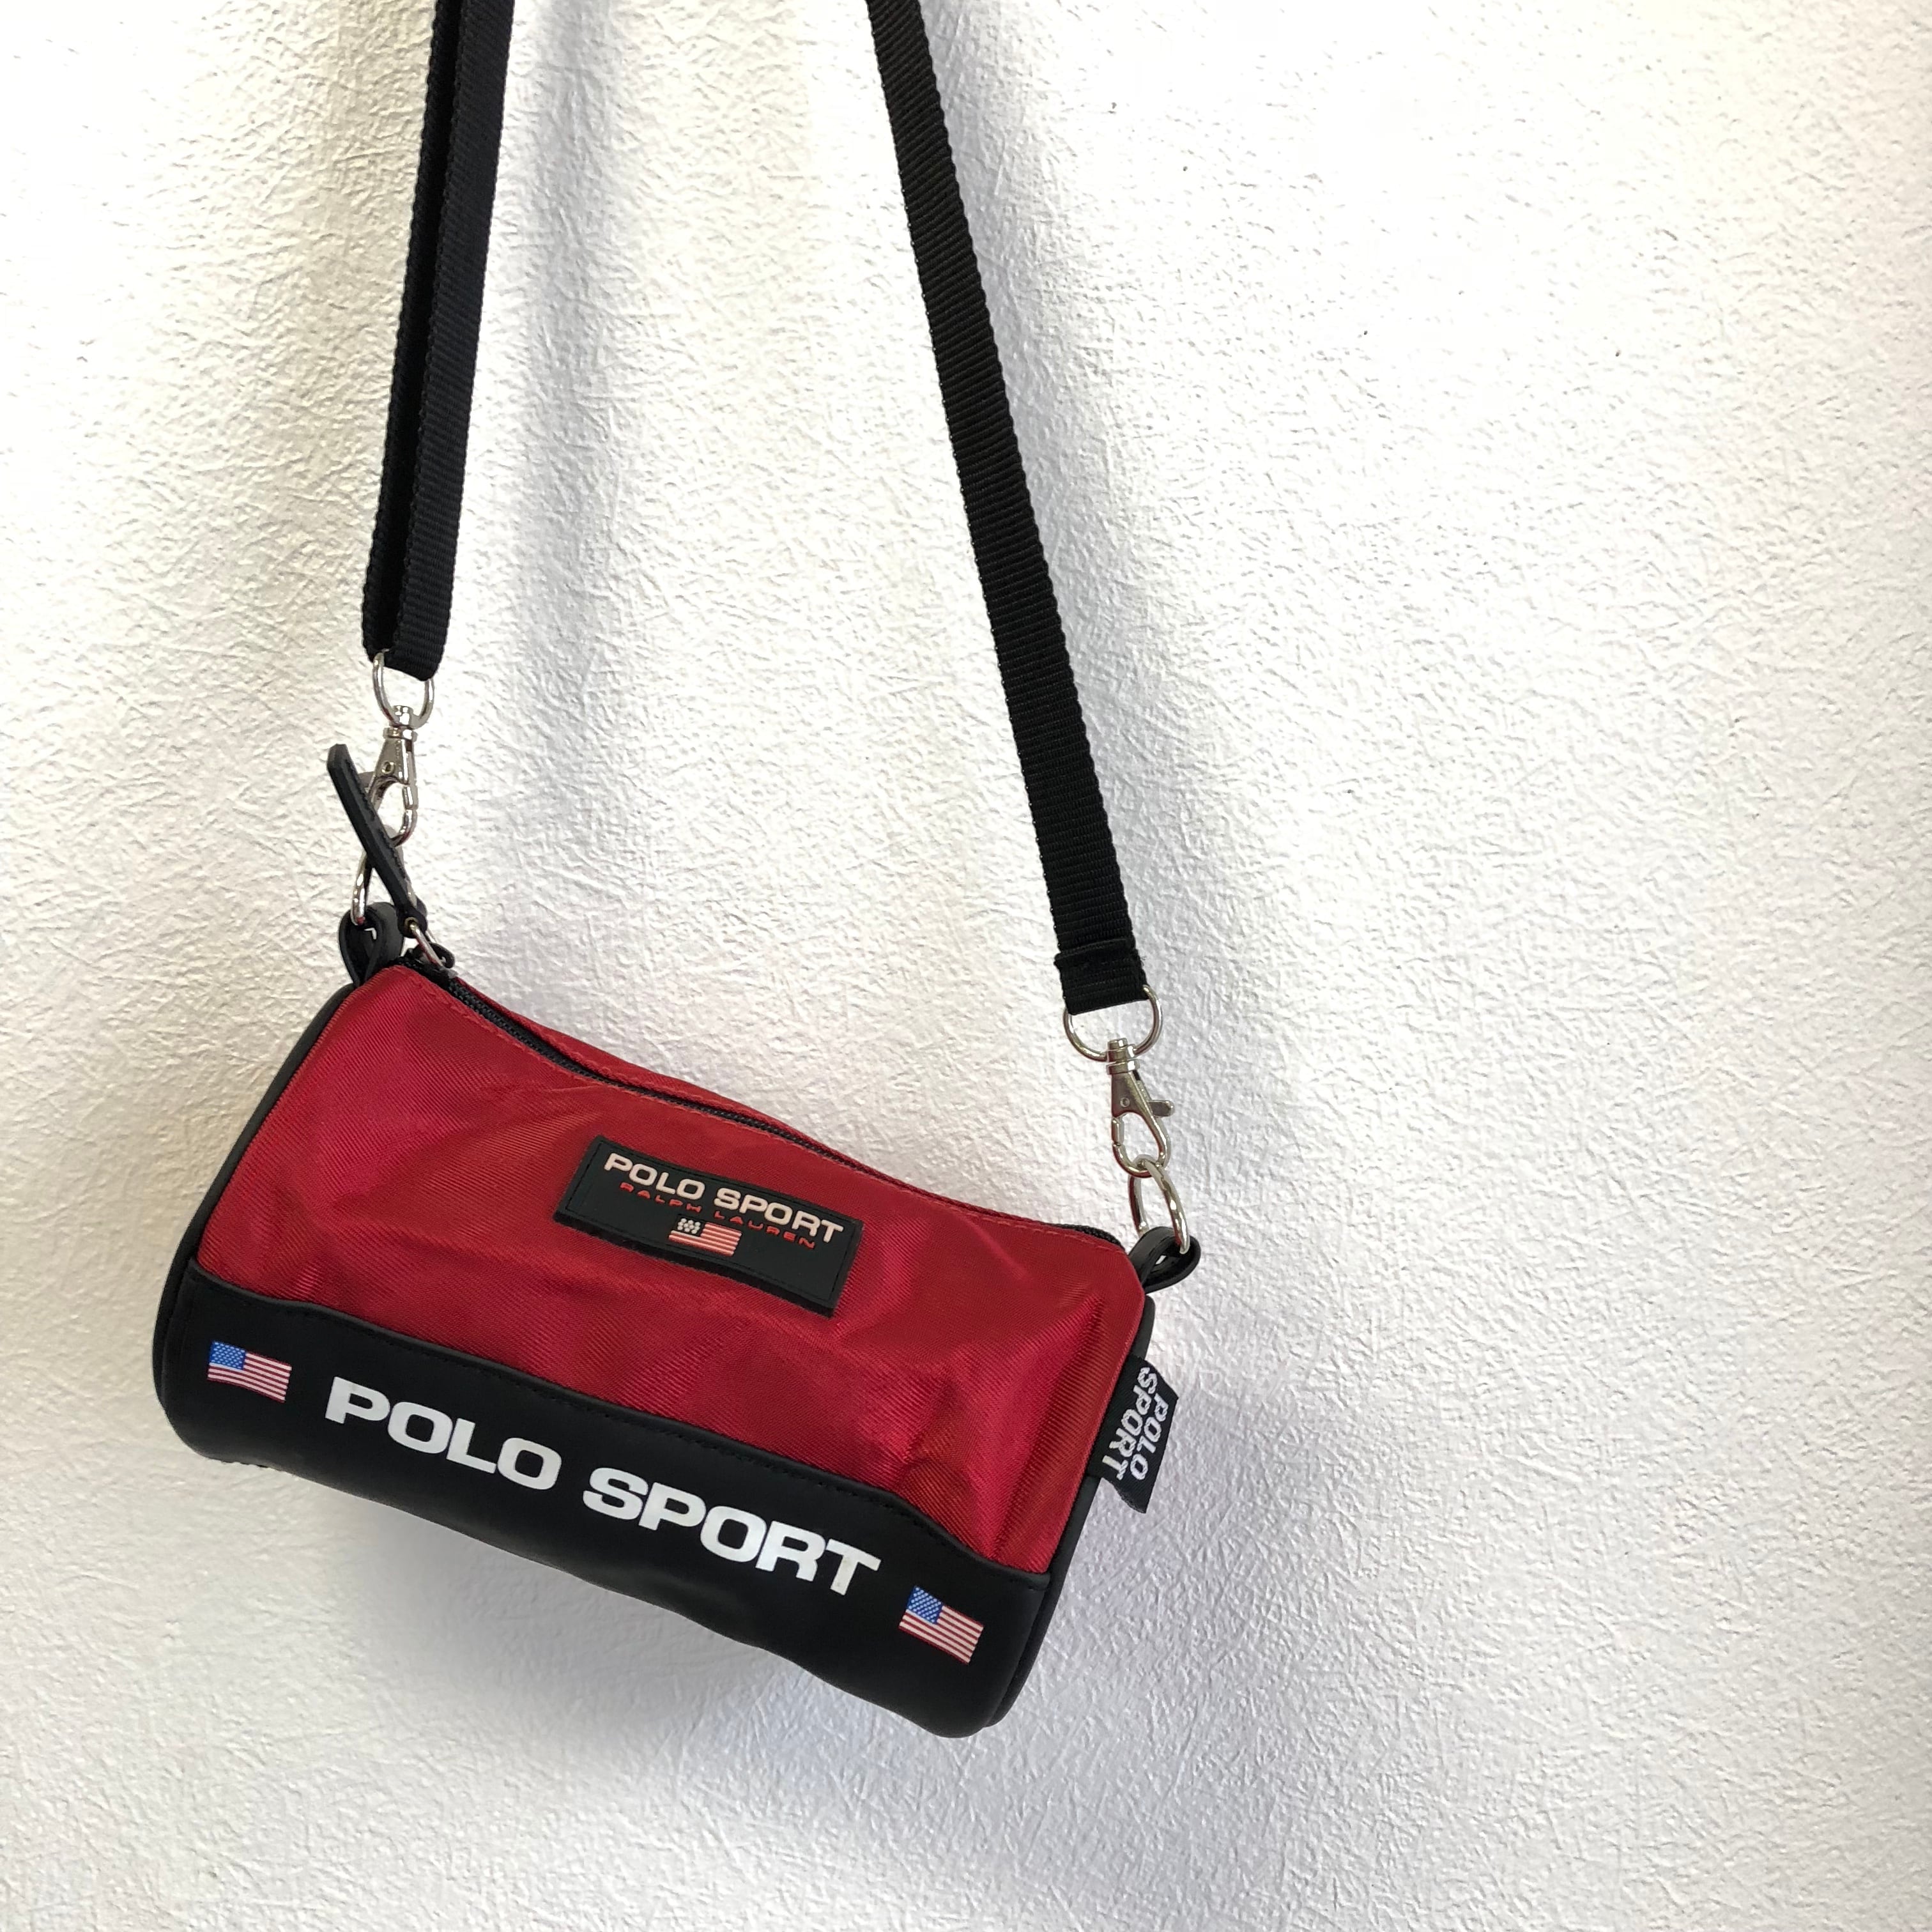 POLO SPORT shoulder bag | one day store